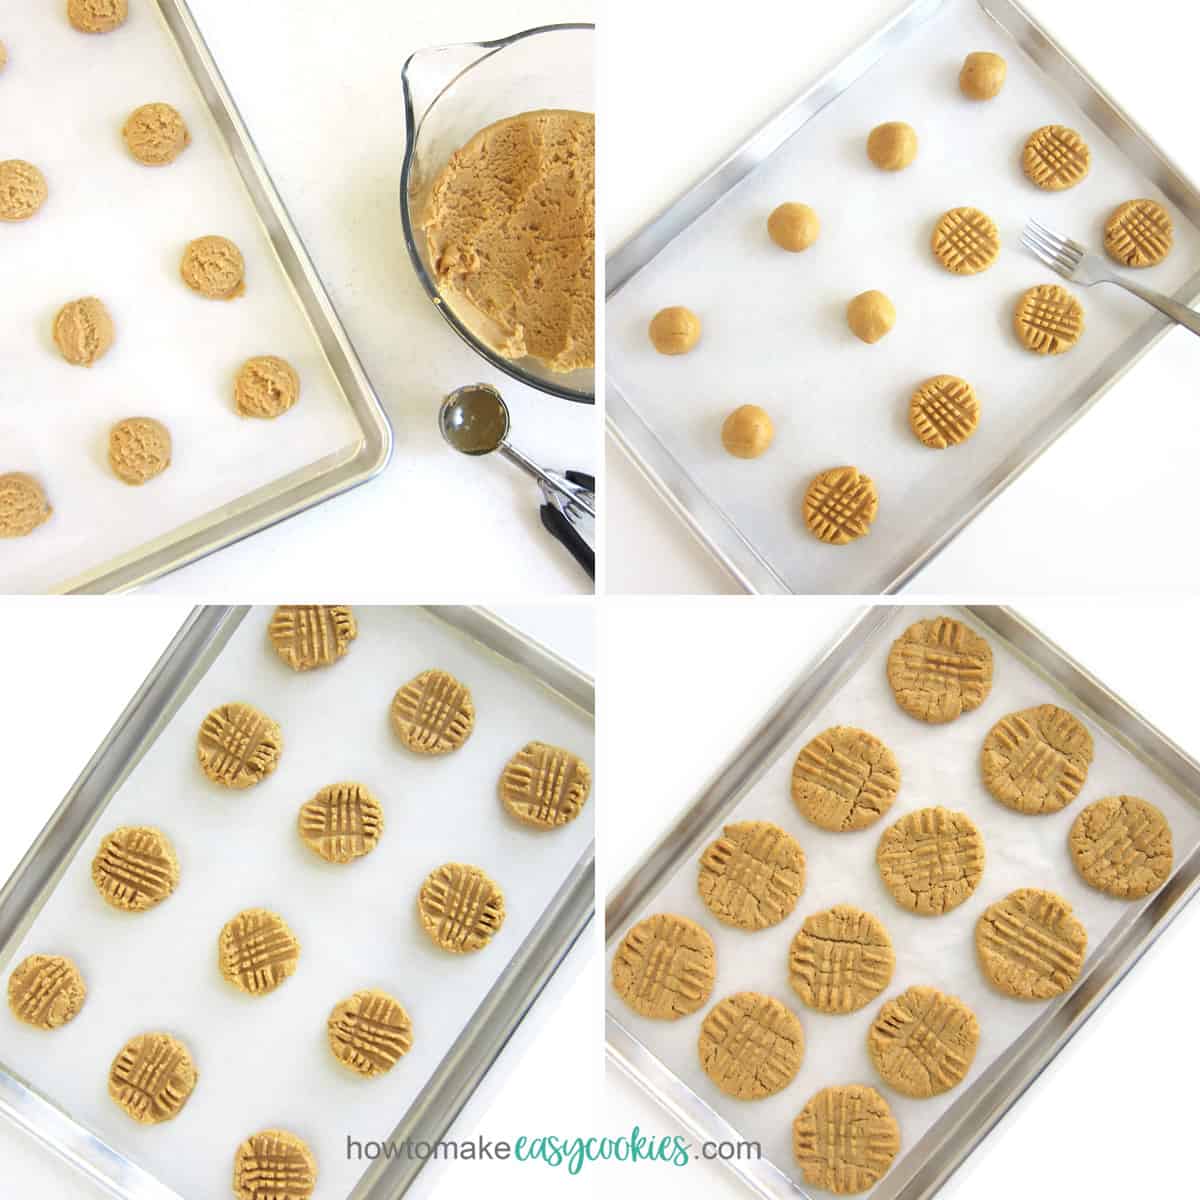 scoop peanut butter cookie dough, then flatten with fork, and bake